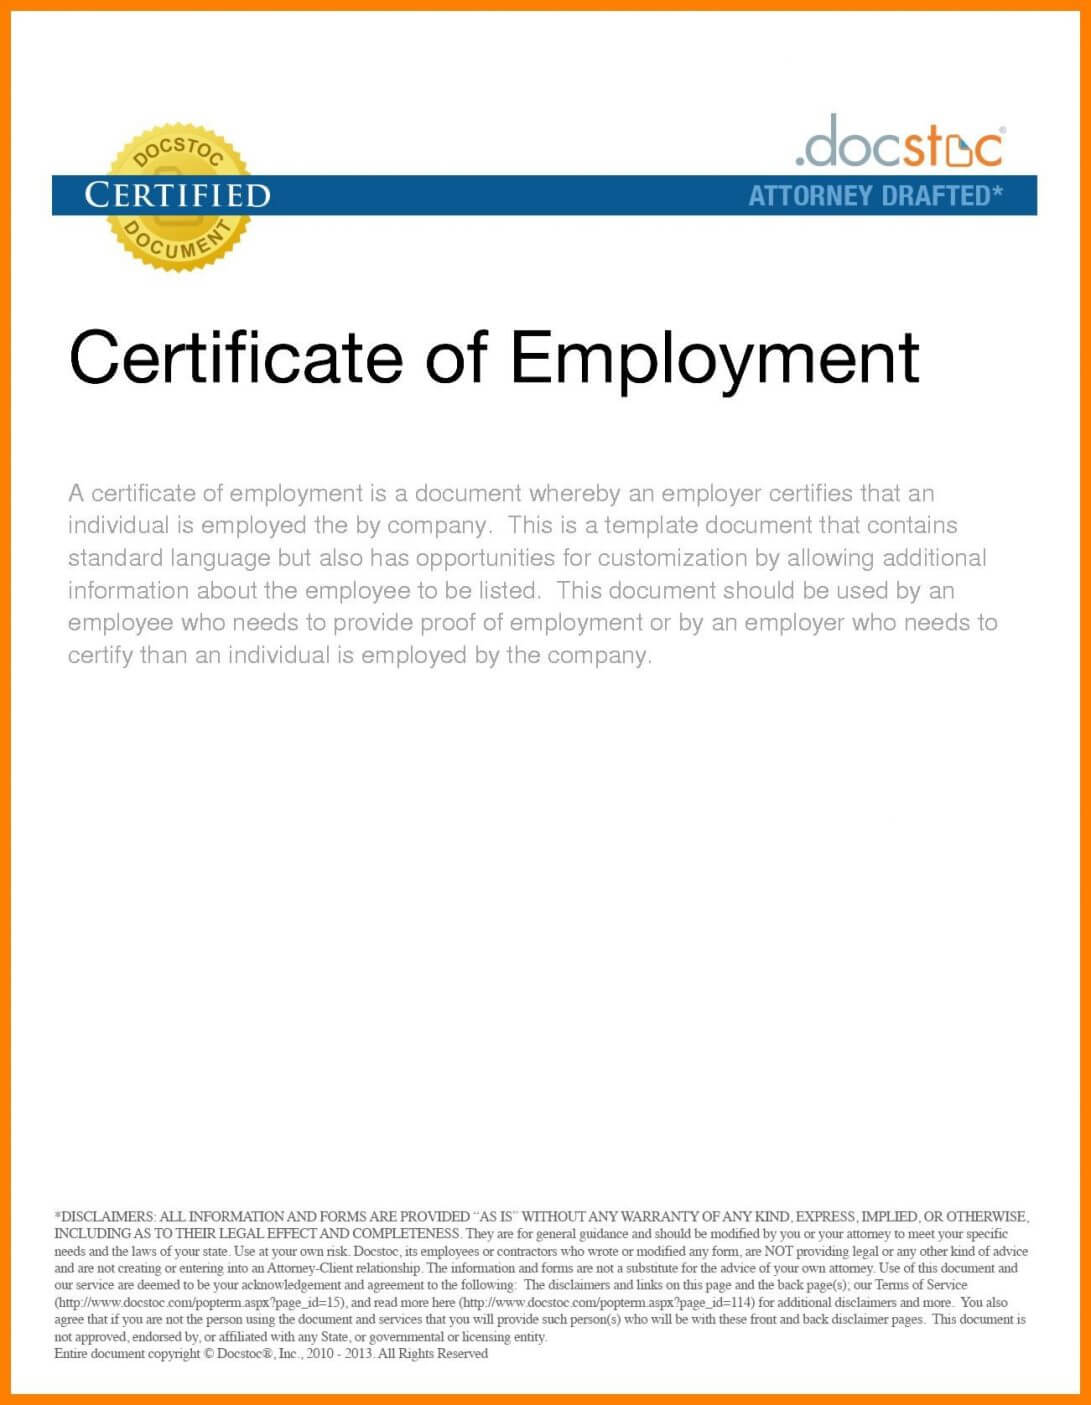 016 Sample Certificate Of Employment Certificates Stunning Pertaining To Sample Certificate Employment Template